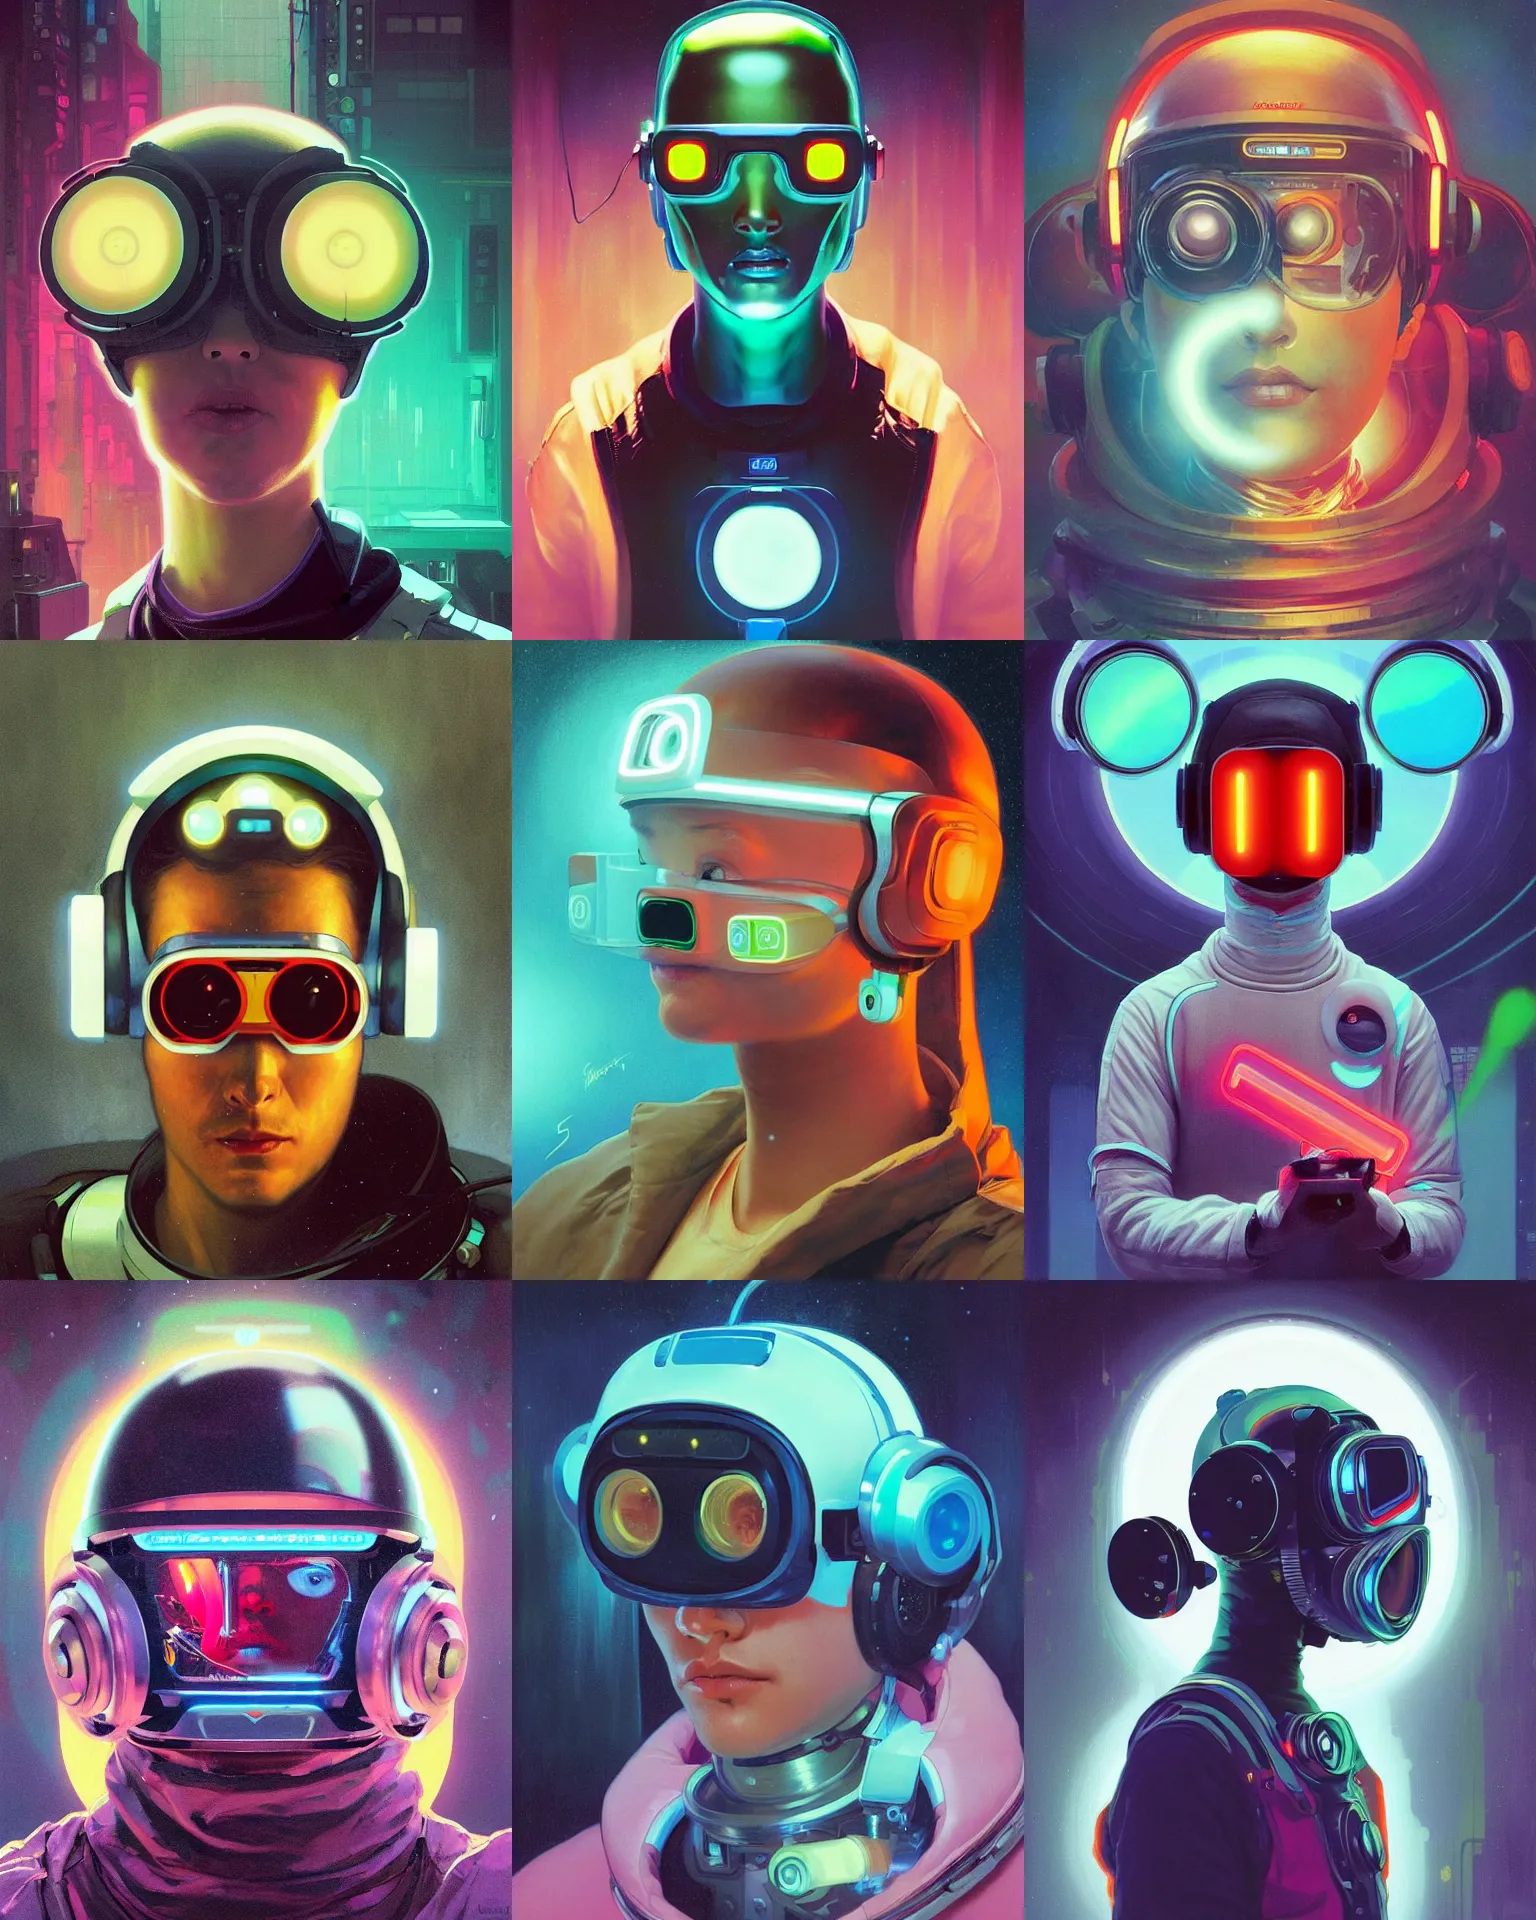 Prompt: future coder looking on, compact cyclops visor over eyes and sleek bright headphoneset, neon accent lights, desaturated headshot portrait painting by dean cornwall, ilya repin, rhads, tom whalen, alex grey, alphonse mucha, donoto giancola, astronaut cyberpunk electric fashion photography